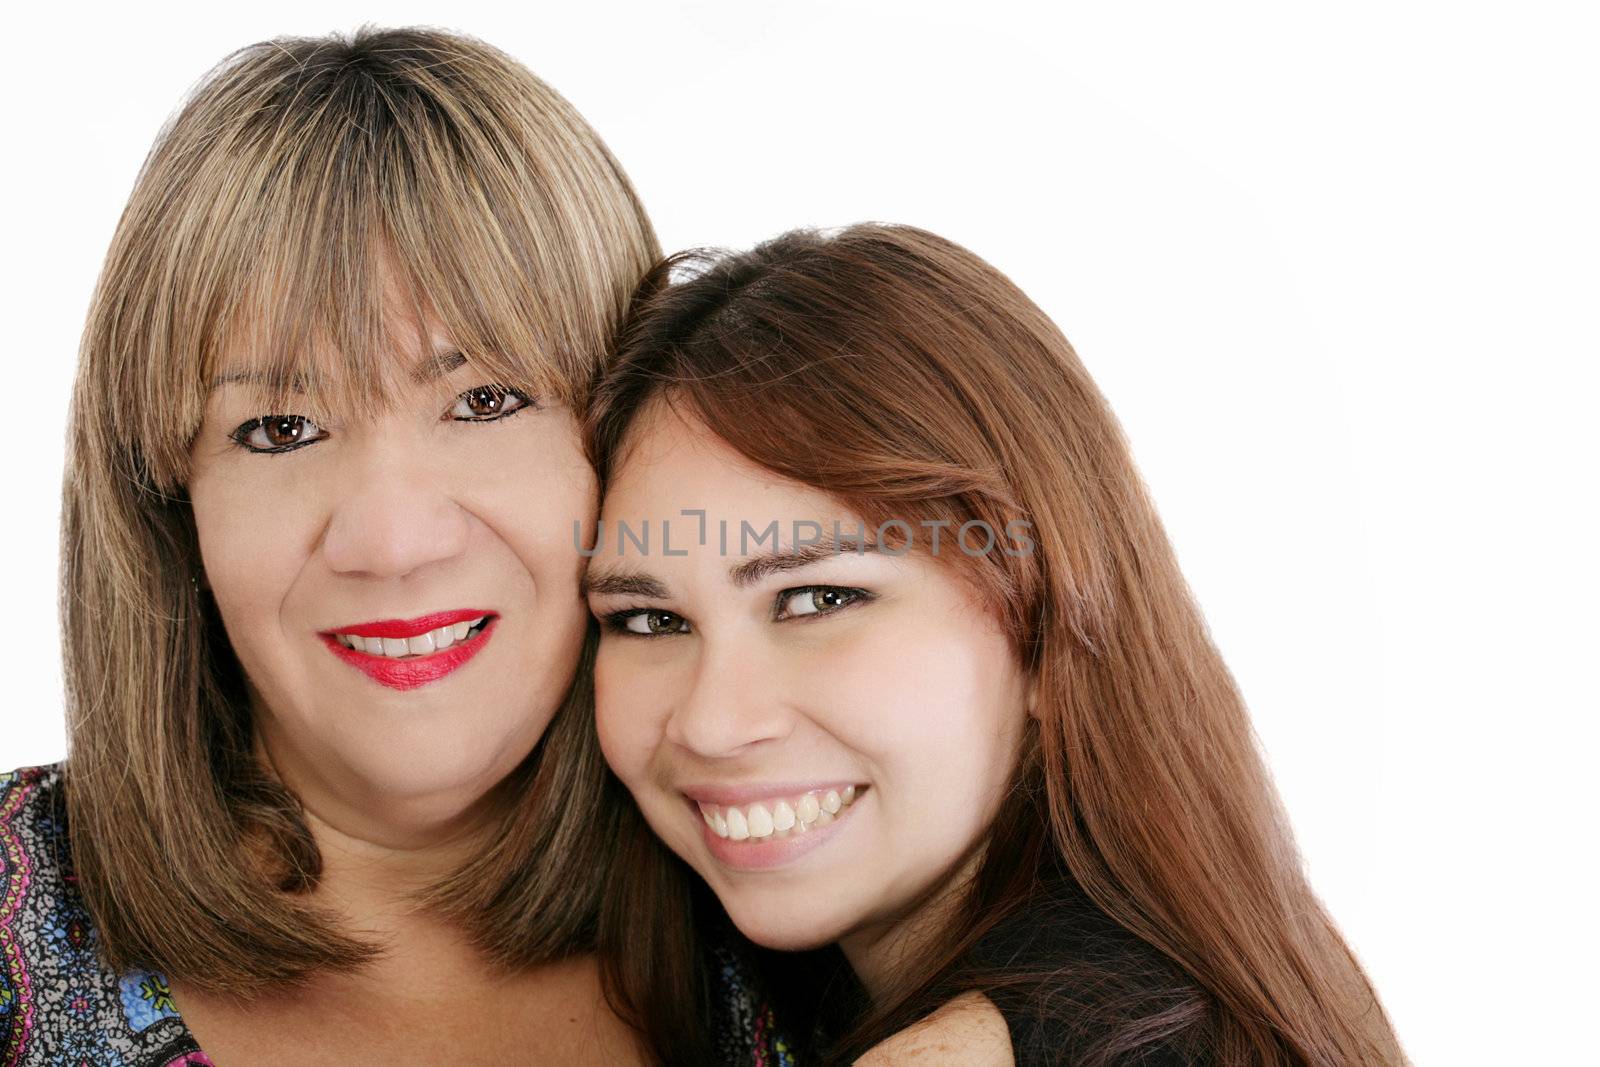 Mother with her daughter looking at the camera